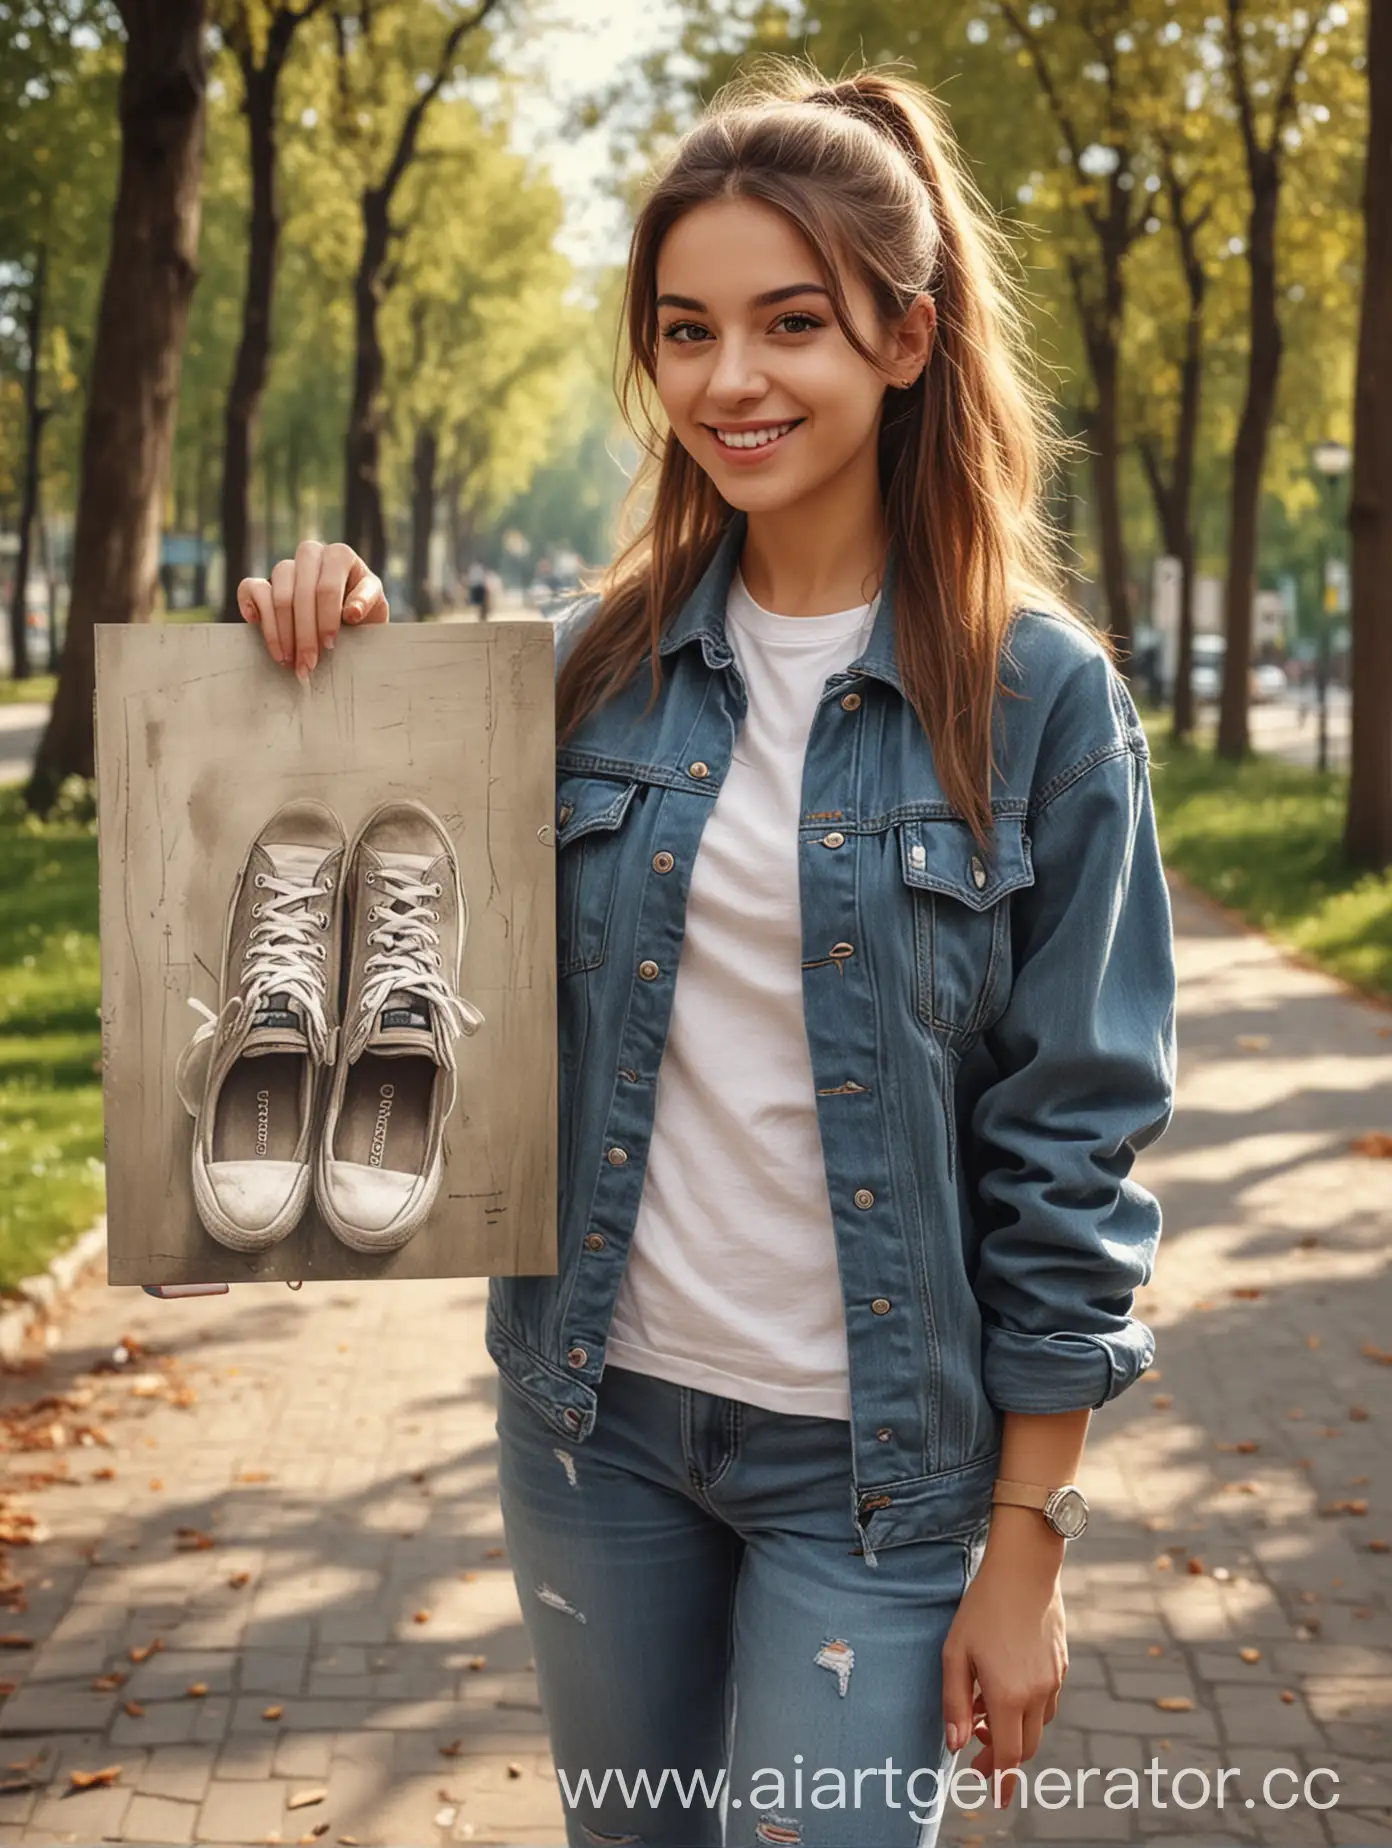 Smiling-Woman-in-Sneakers-Holding-Realistic-Portrait-Canvas-Outdoors